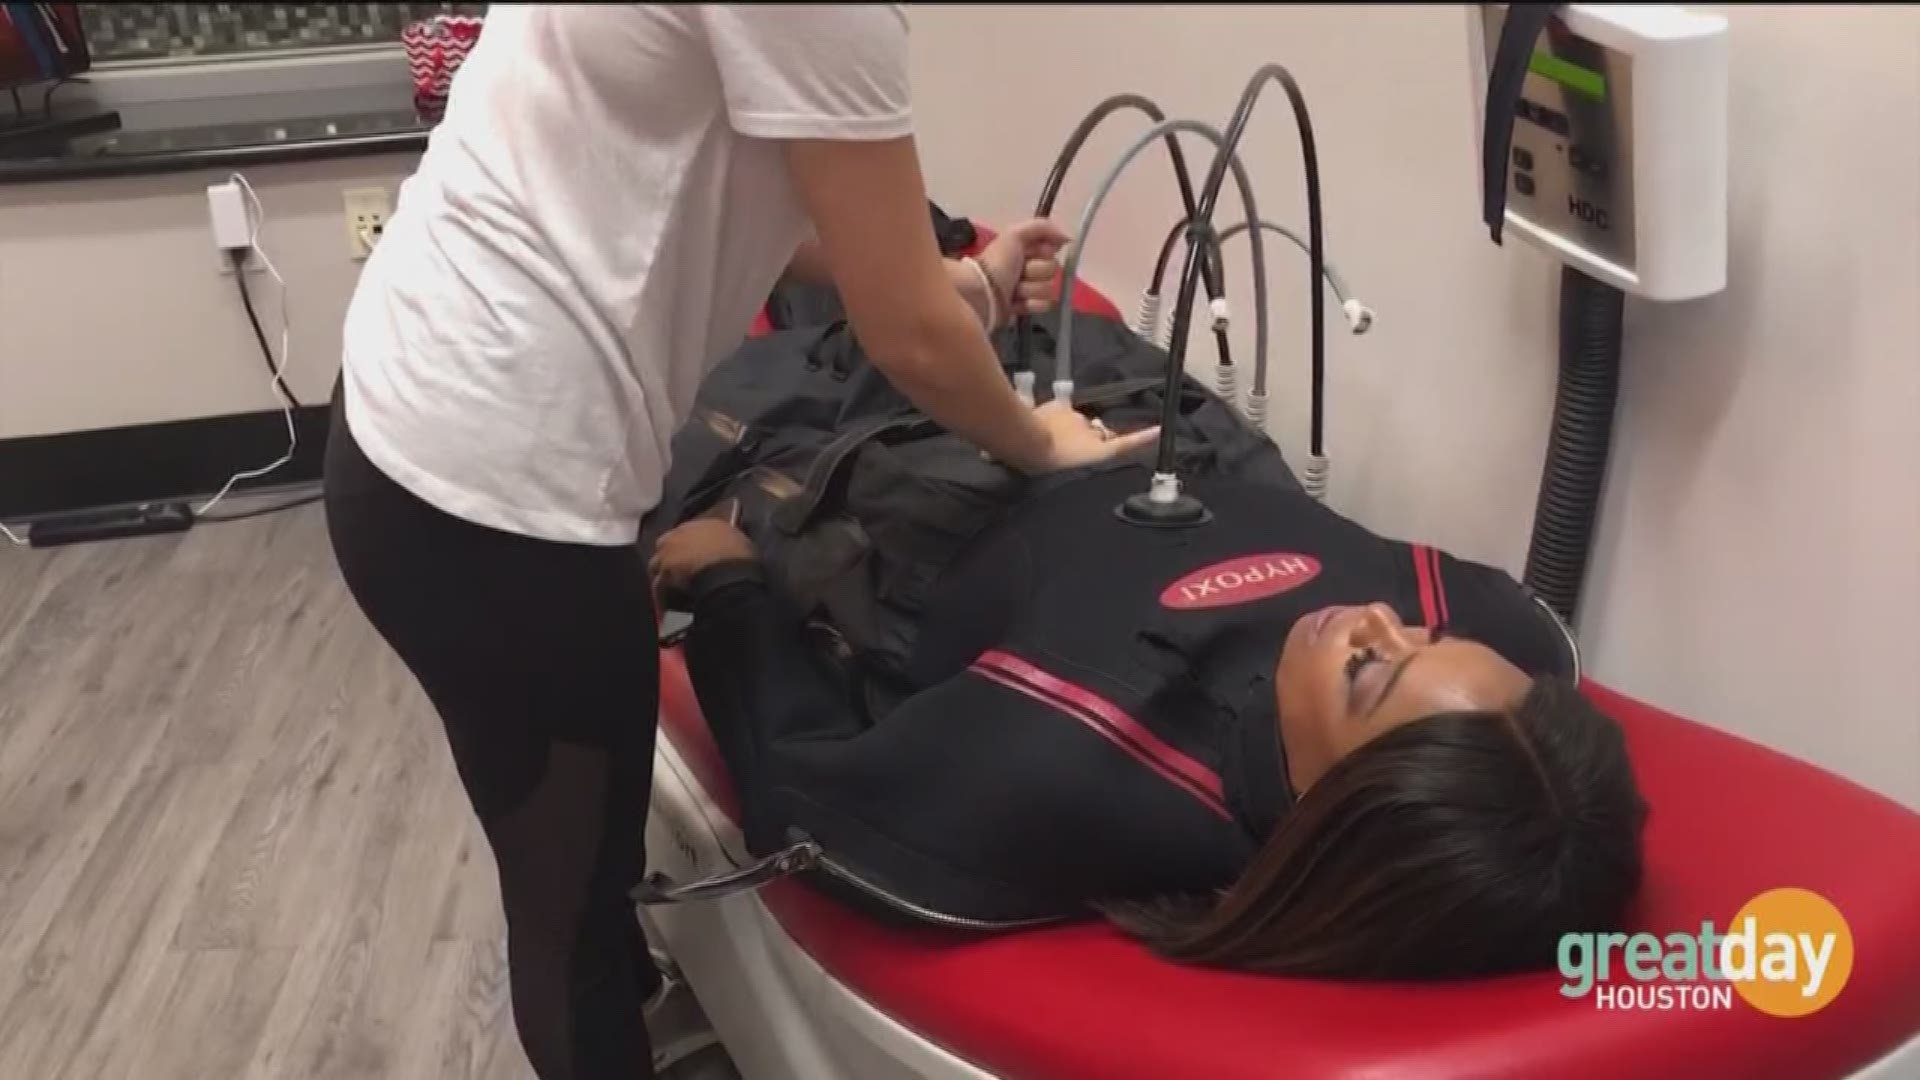 Renew Body Contouring and Hypoxi Houston help trim inches, reduce stubborn fat in just a few hours